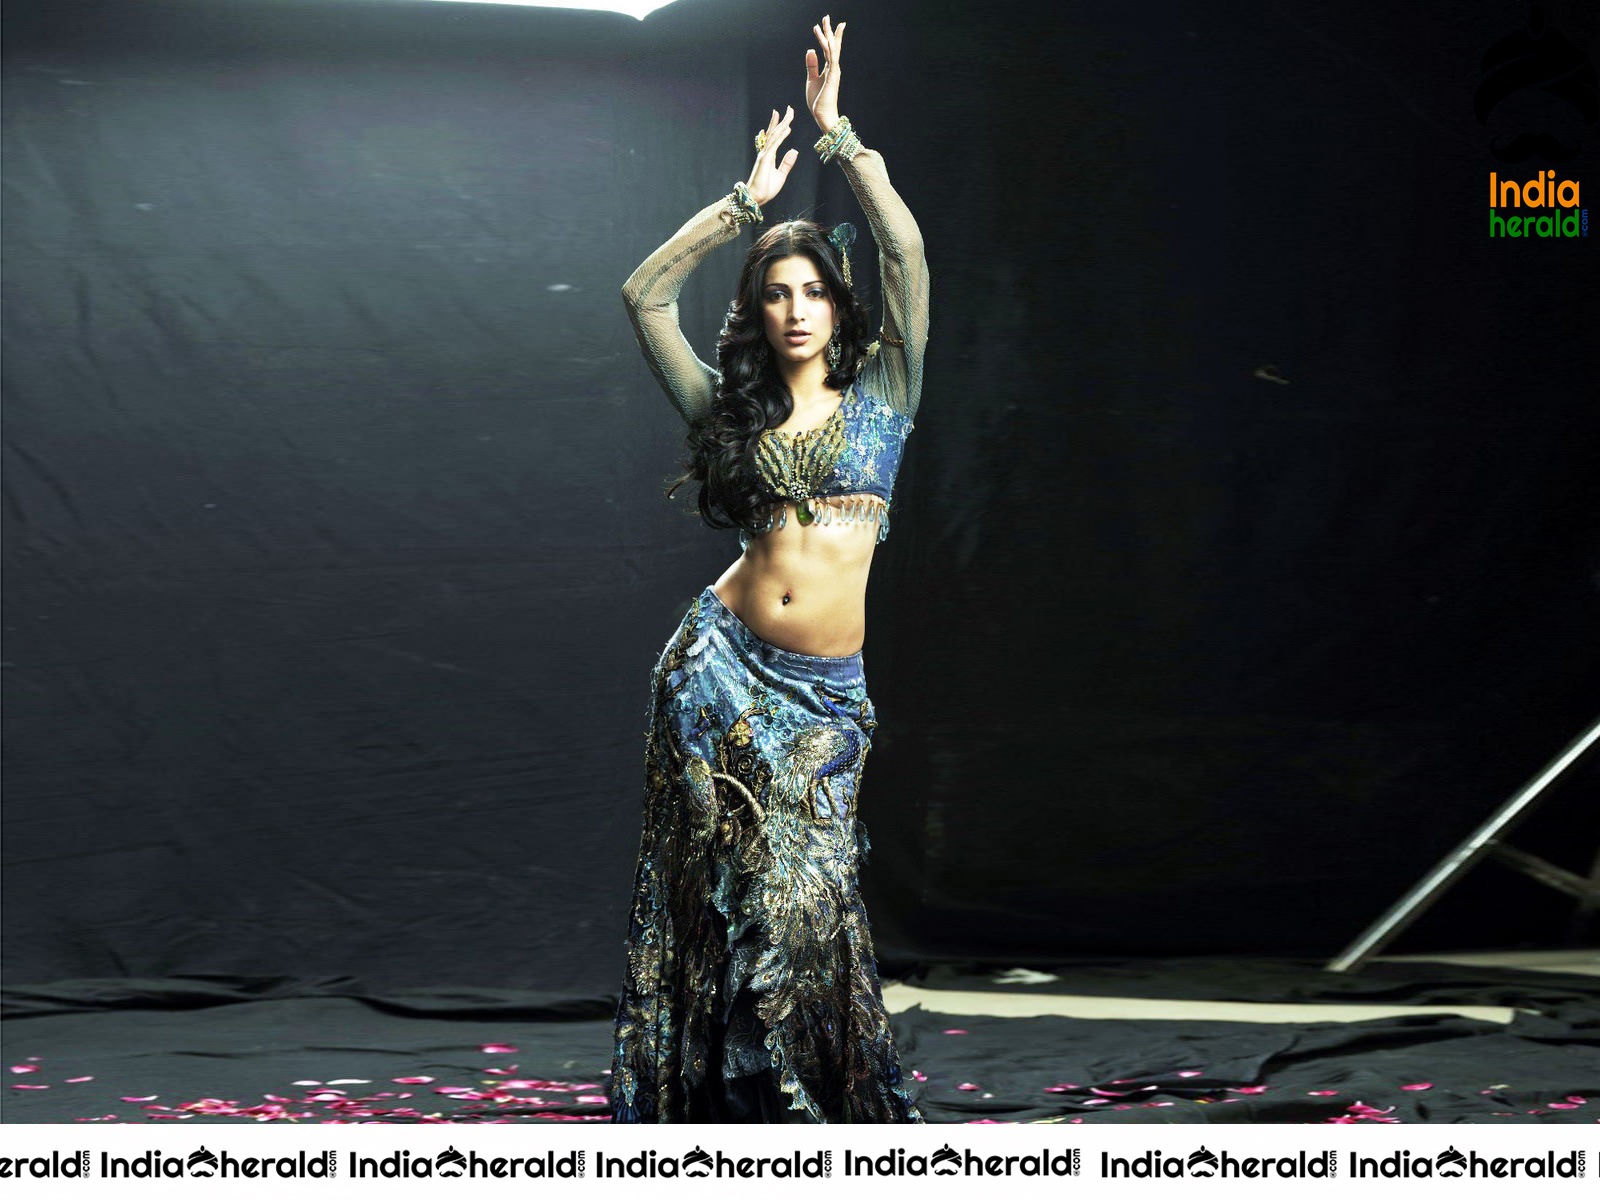 Shruti Haasan exposes her Hot Milky Midriff and Teasing Navel in these Unseen Photos